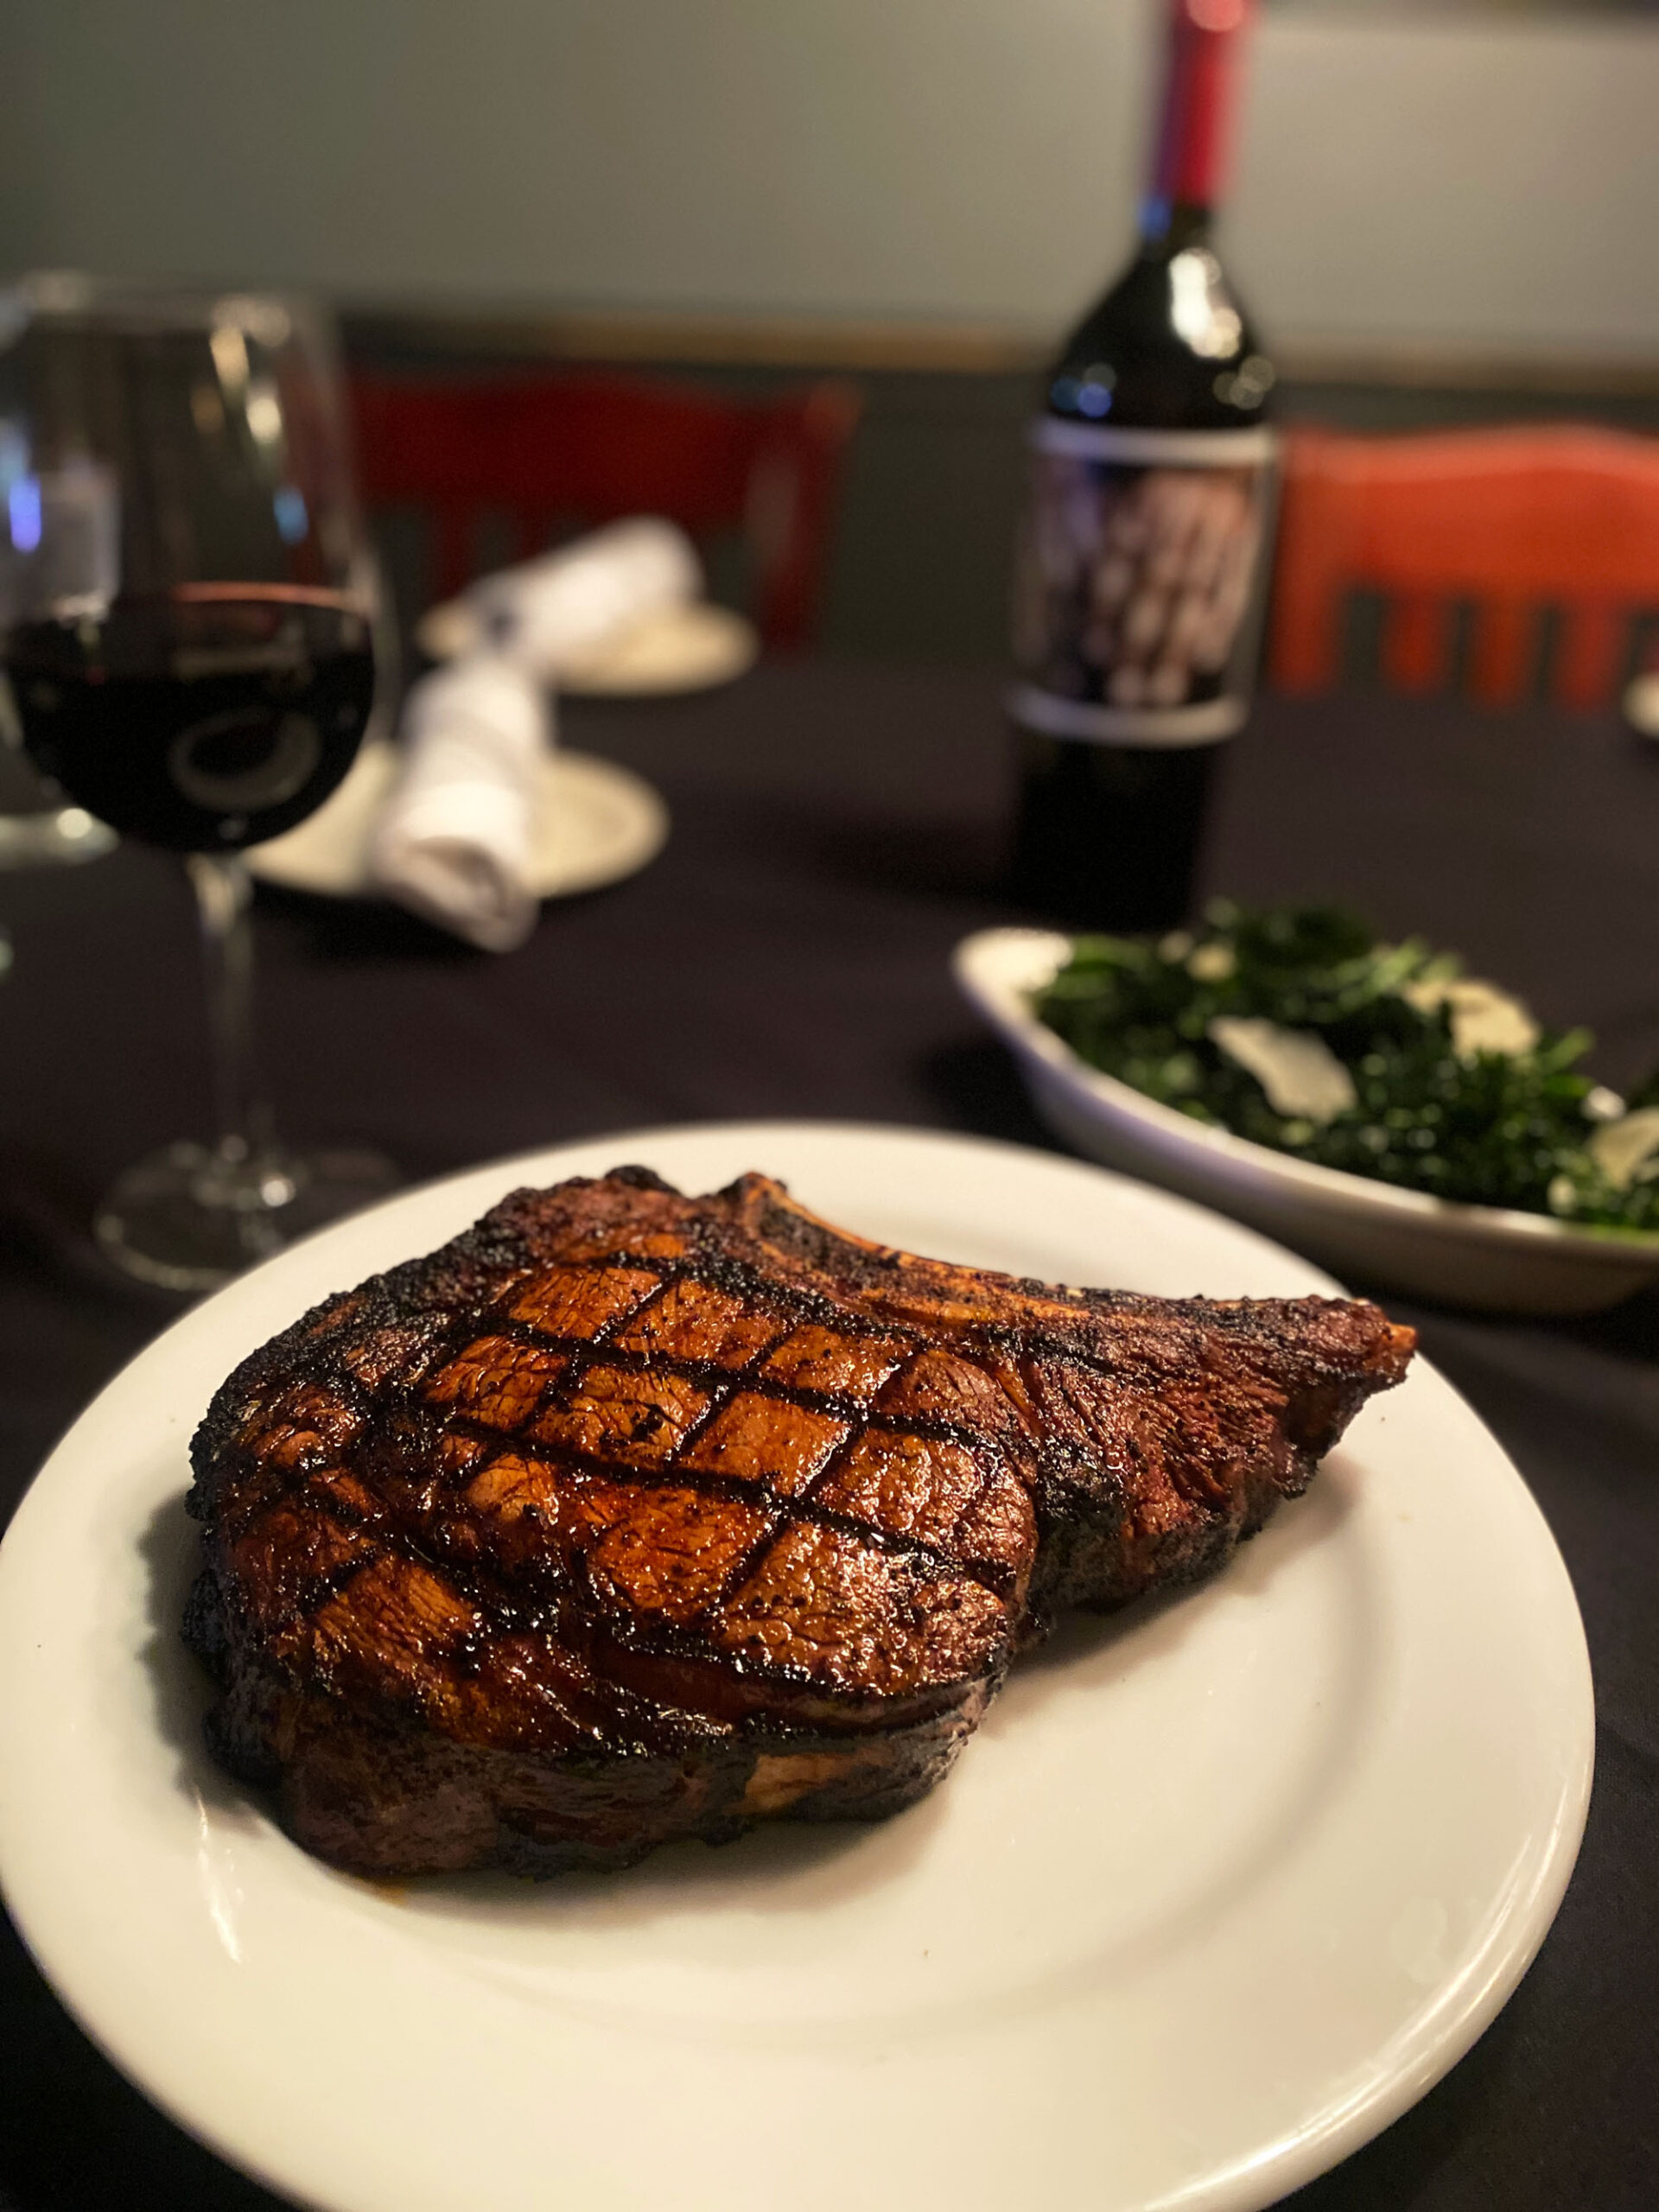 A large bone-in steak and red wine sit on a table with a black tablecloth.